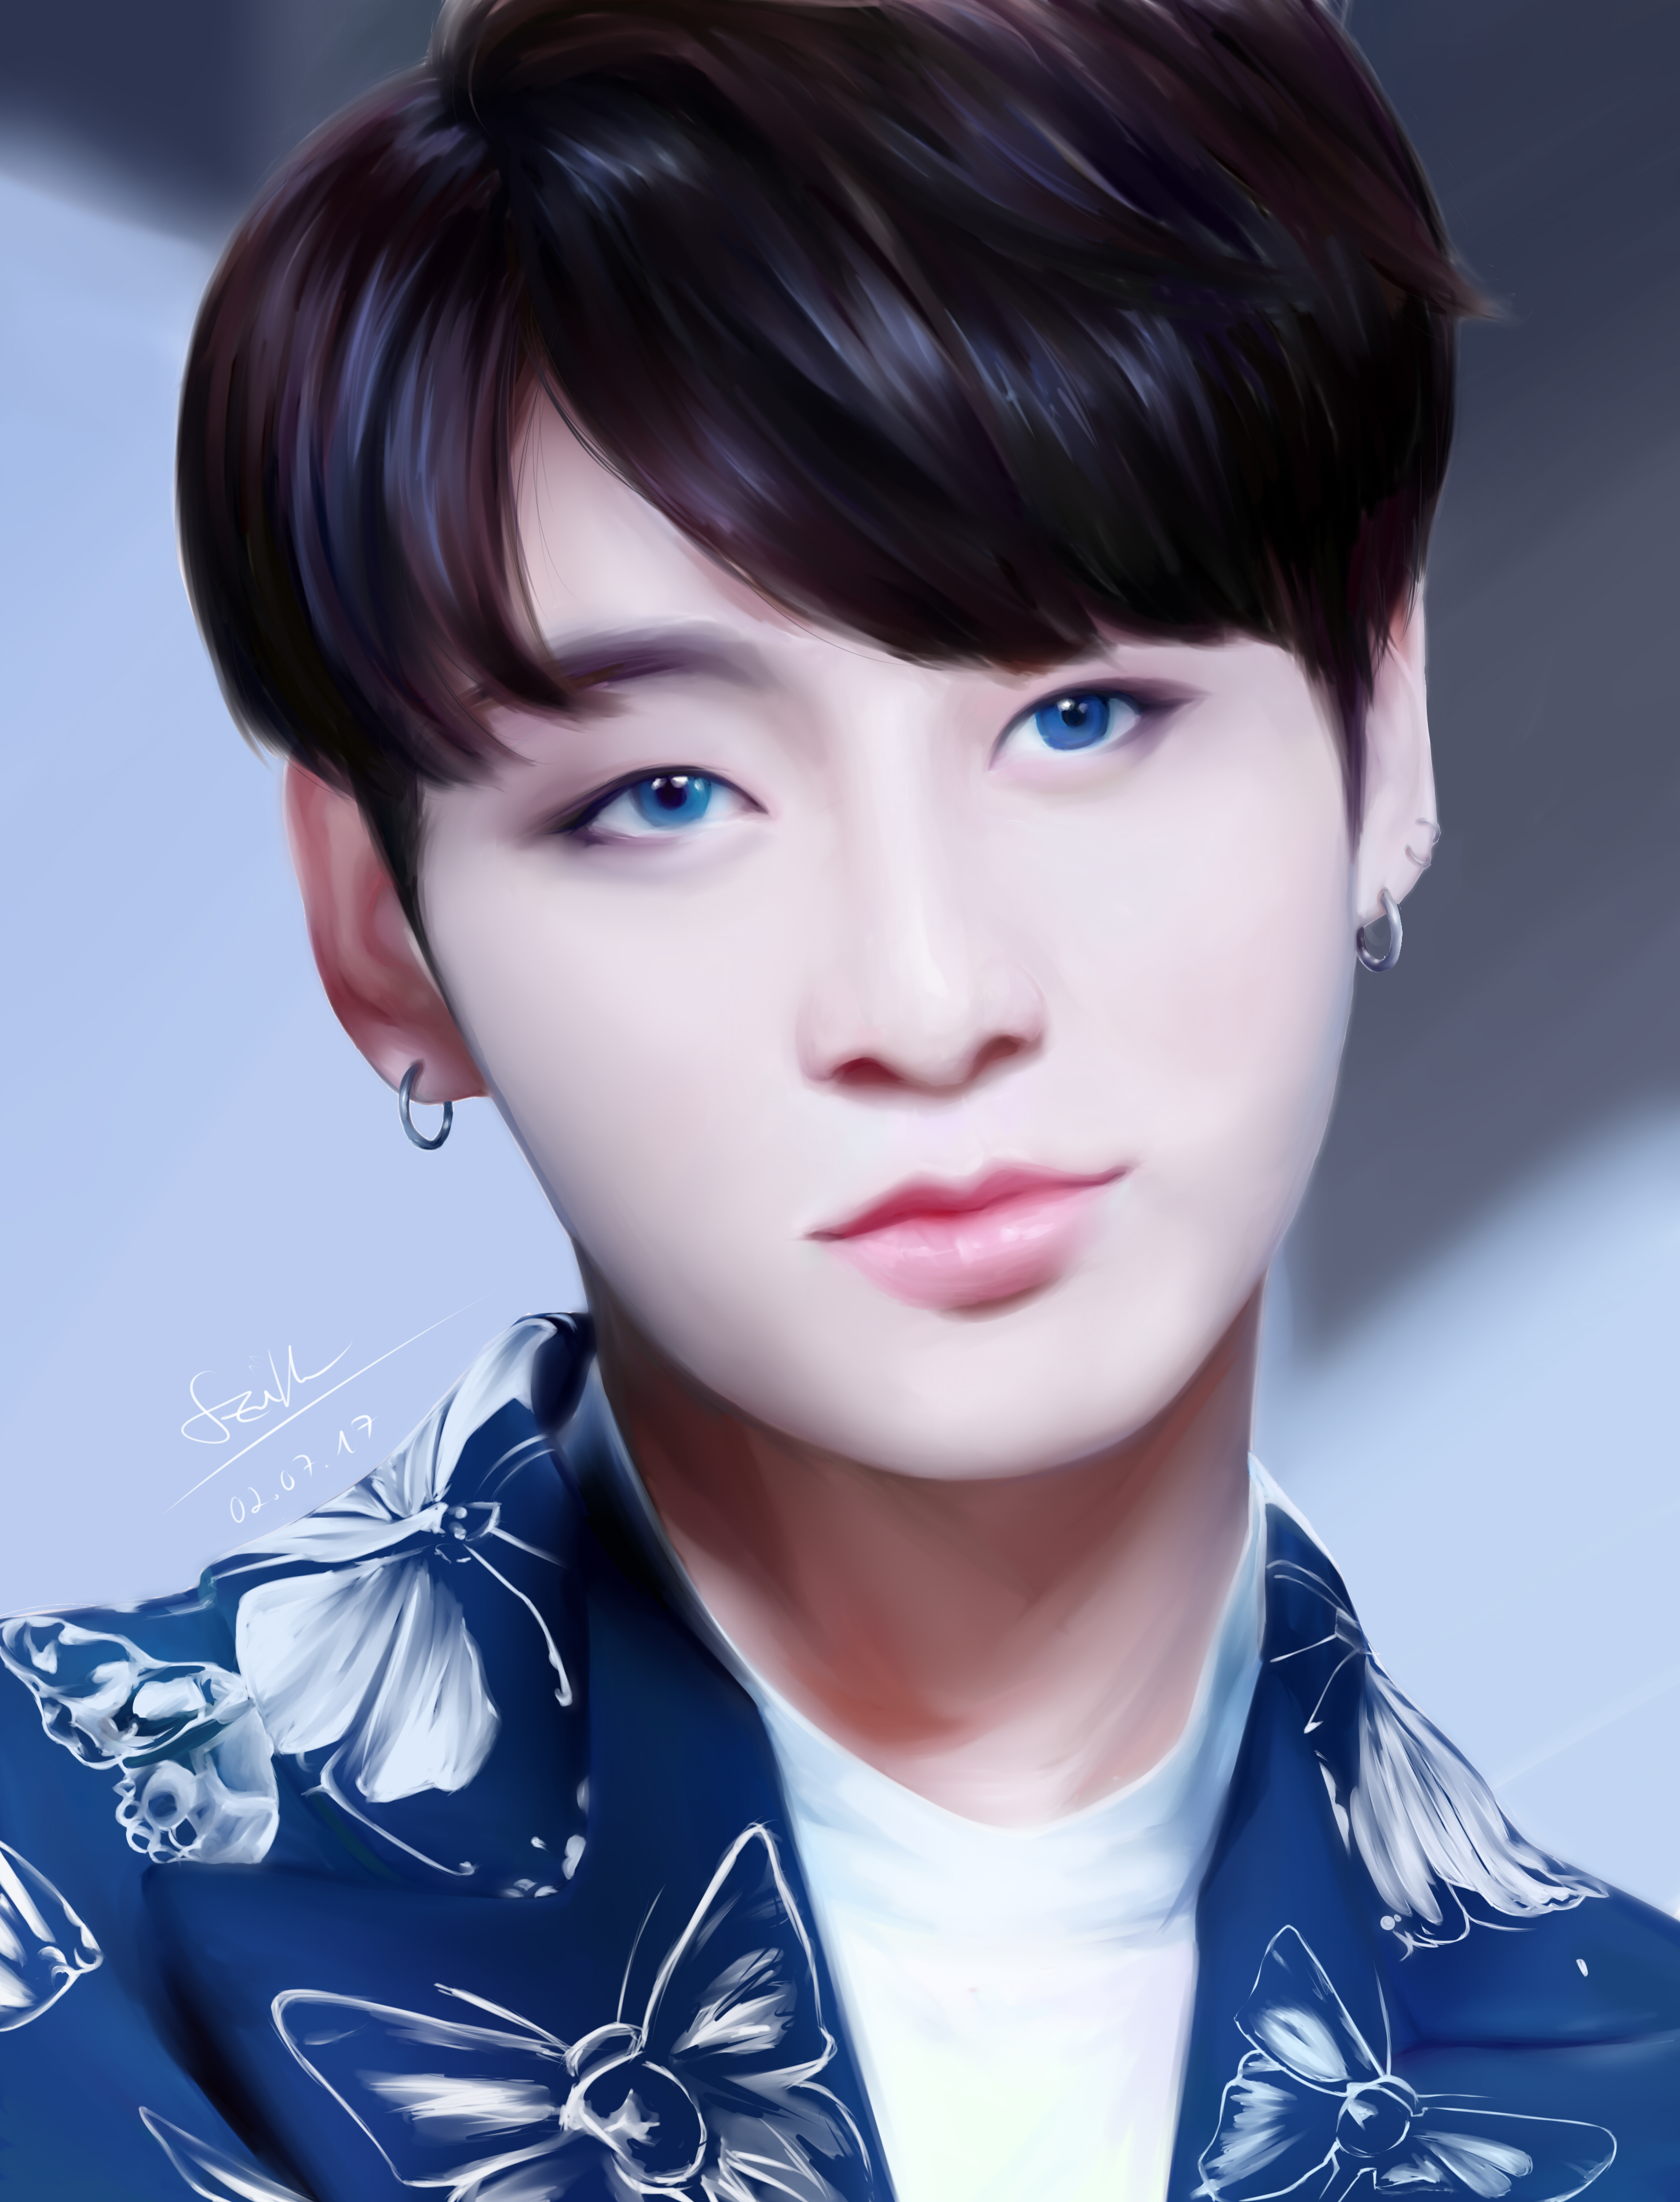 Another BTS Fanart of Jeon Jungkook by Szith on DeviantArt